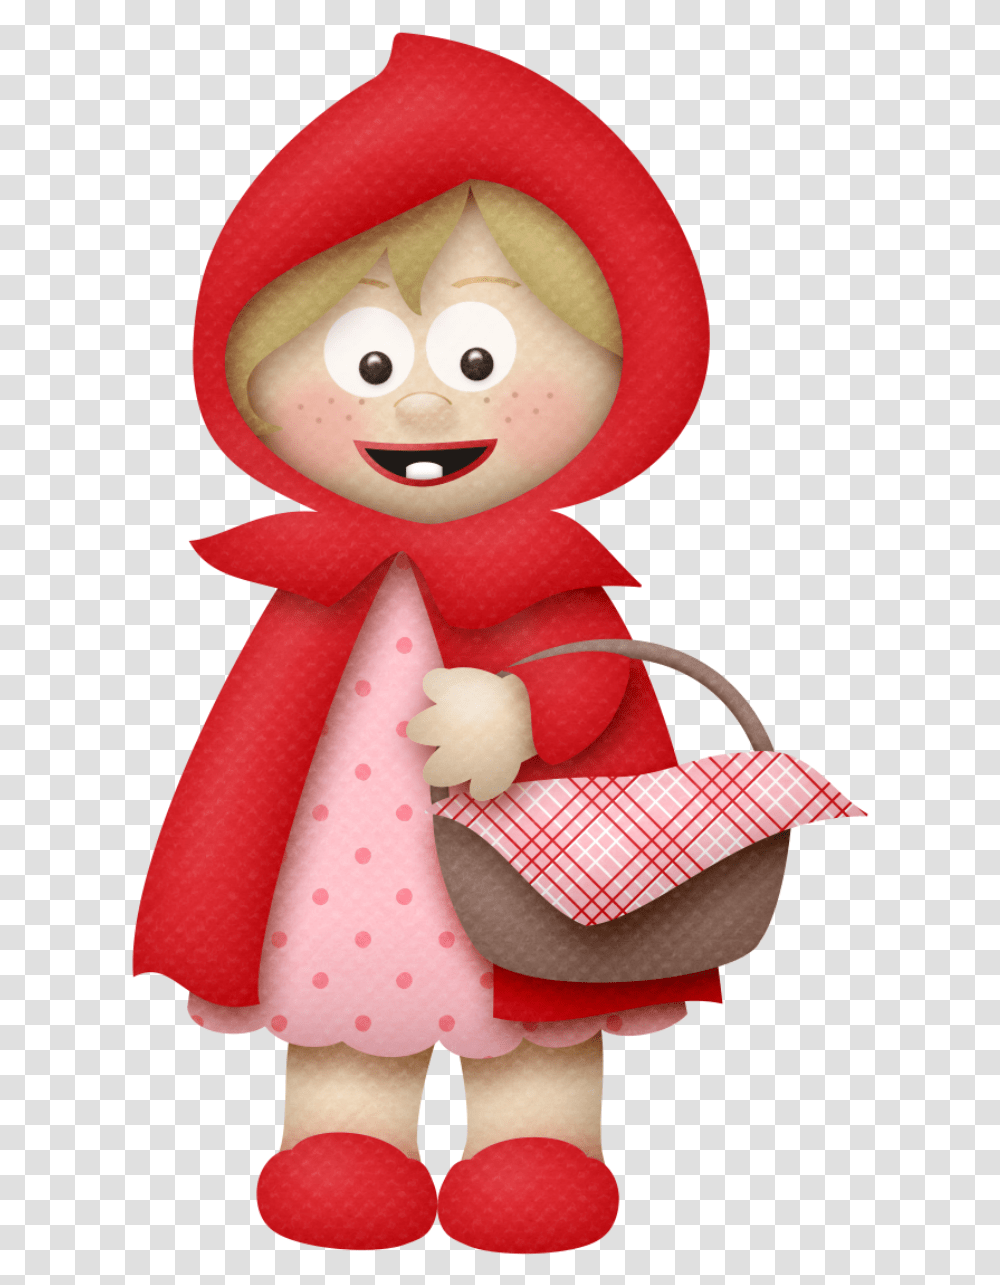 Little Red Riding Hood Clipart Download Cartoon Doll Toy Apparel Transparent Png Pngset Com